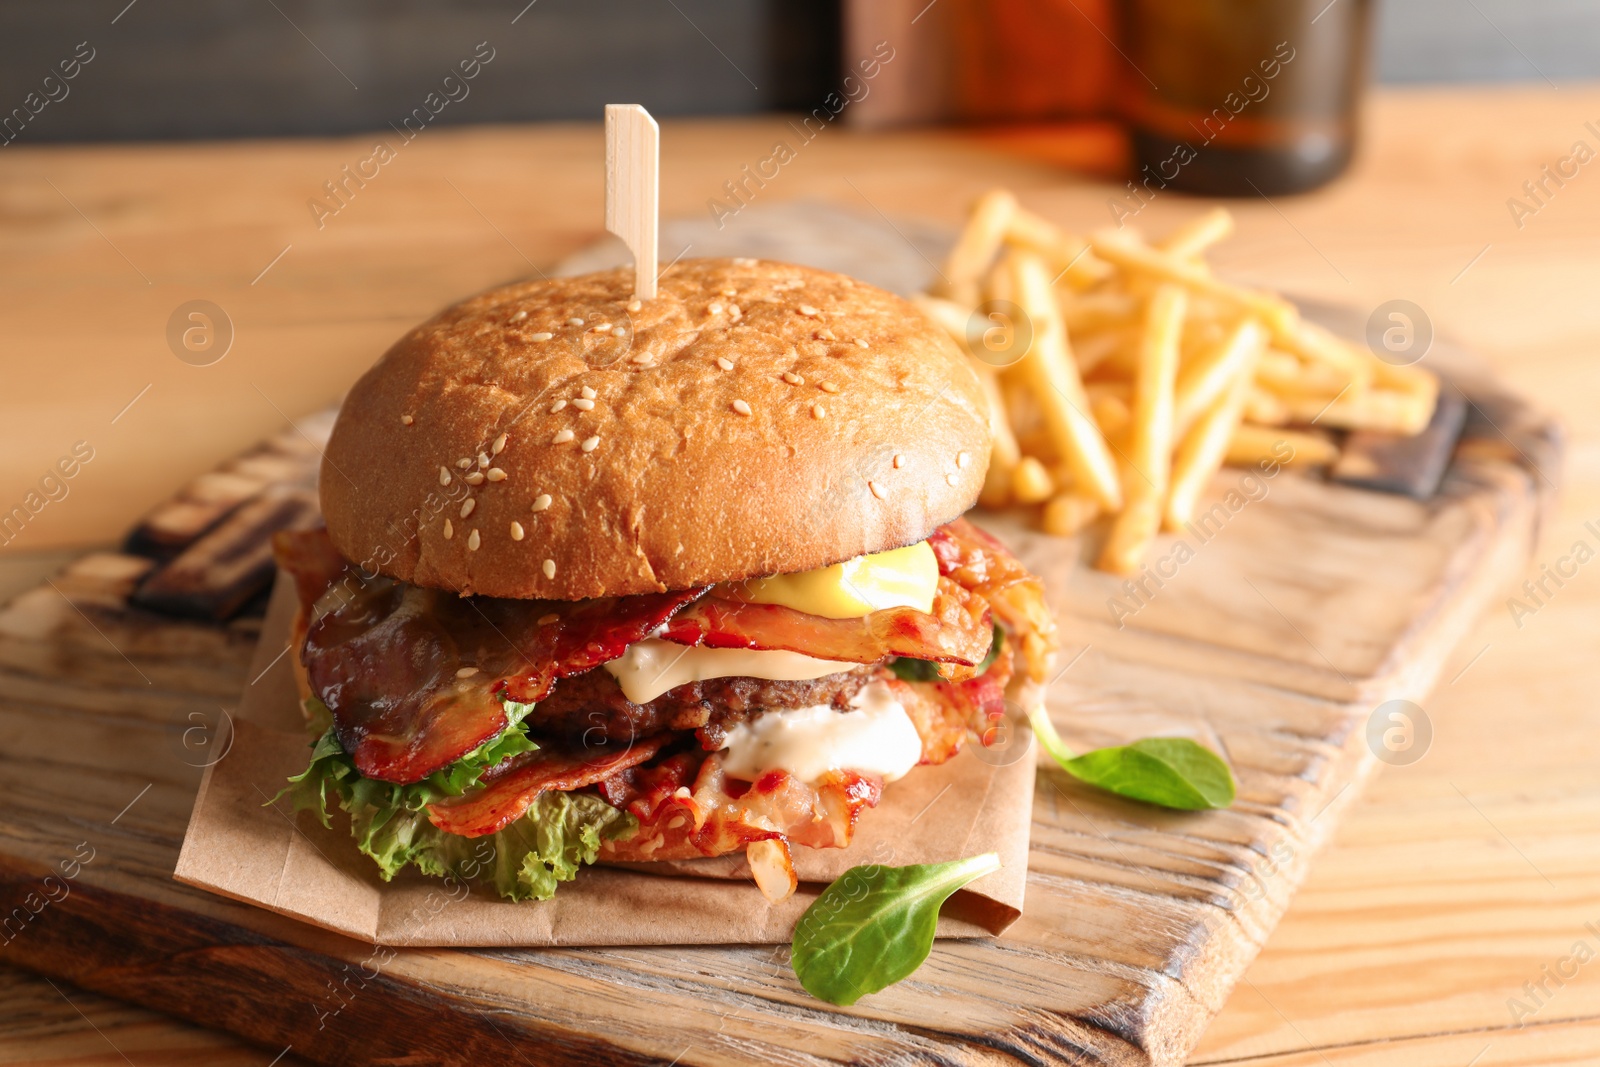 Photo of Tasty burger with bacon and french fries on wooden board